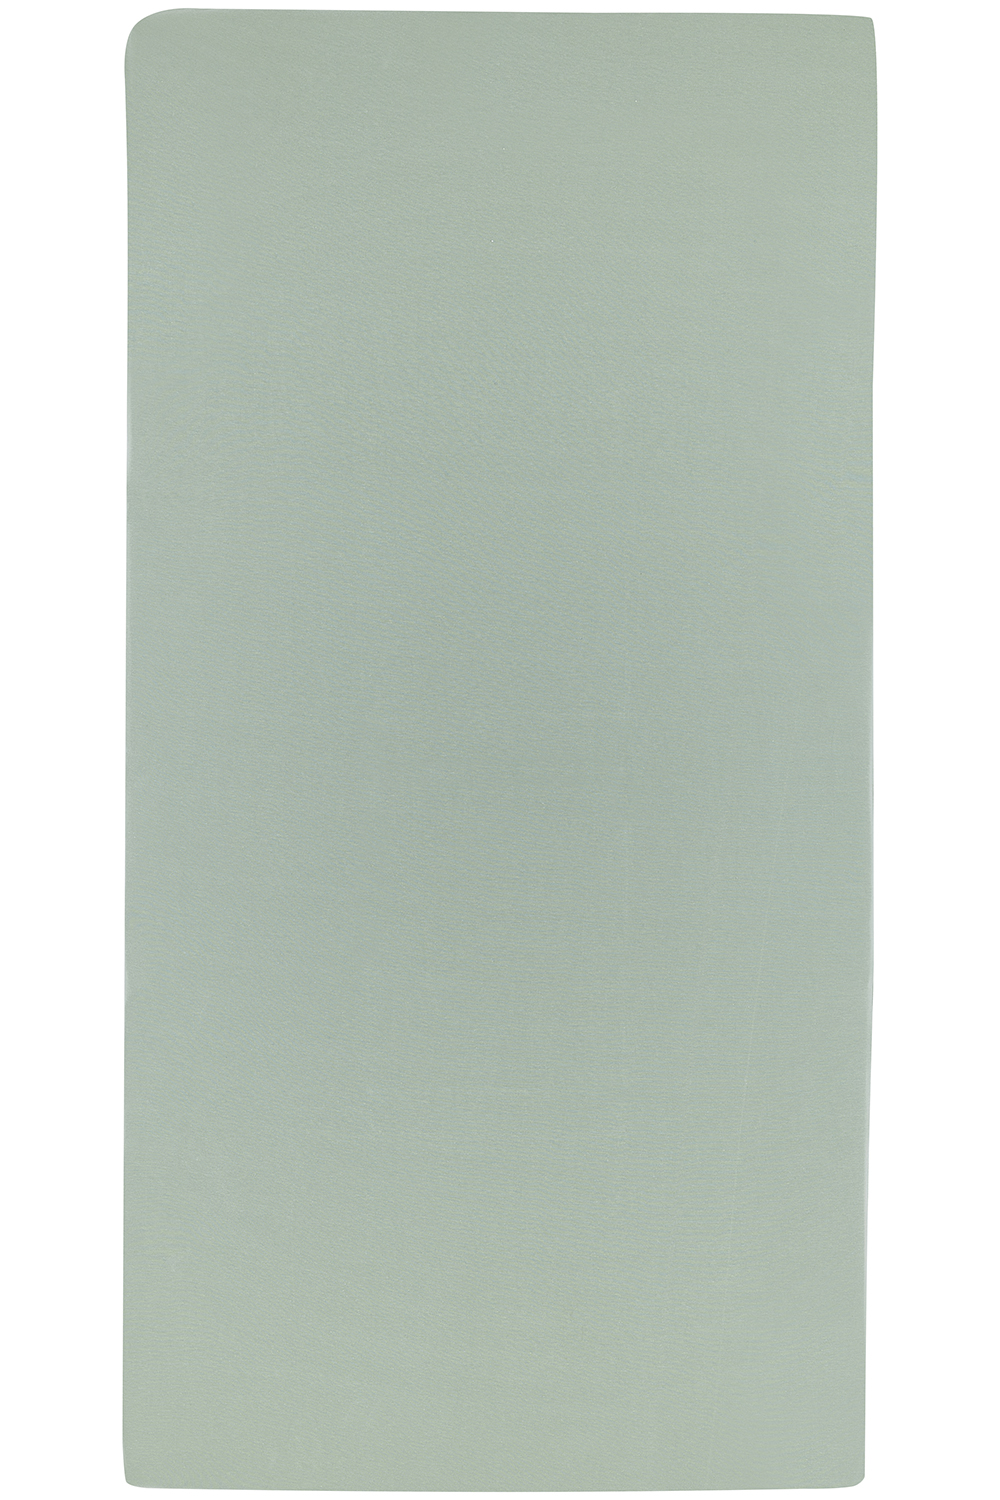 Camping bed mattress cover Uni - stone green - 60x120cm